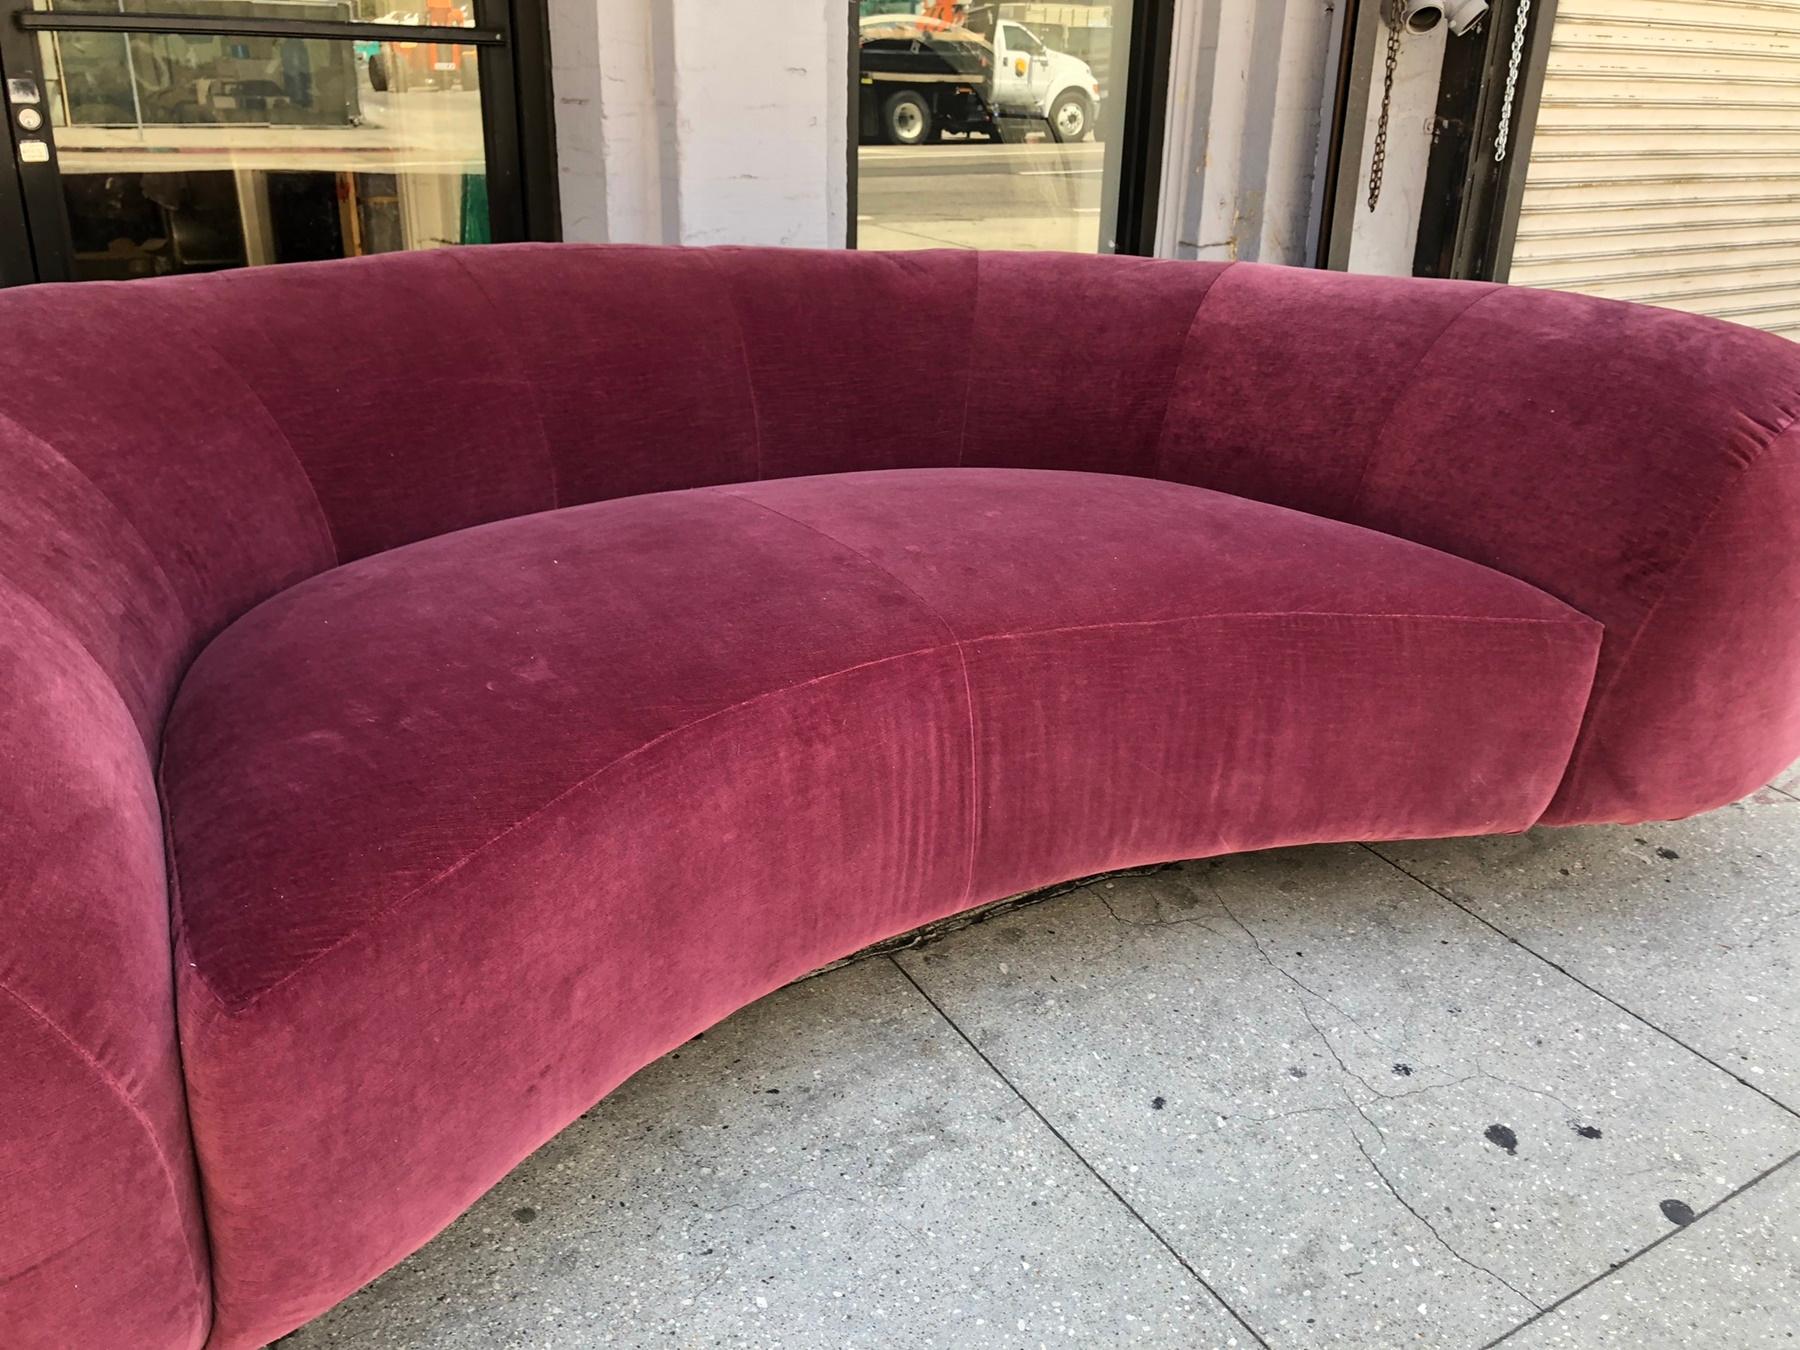 American Large Vintage Sofa in a Burgundy Fabric